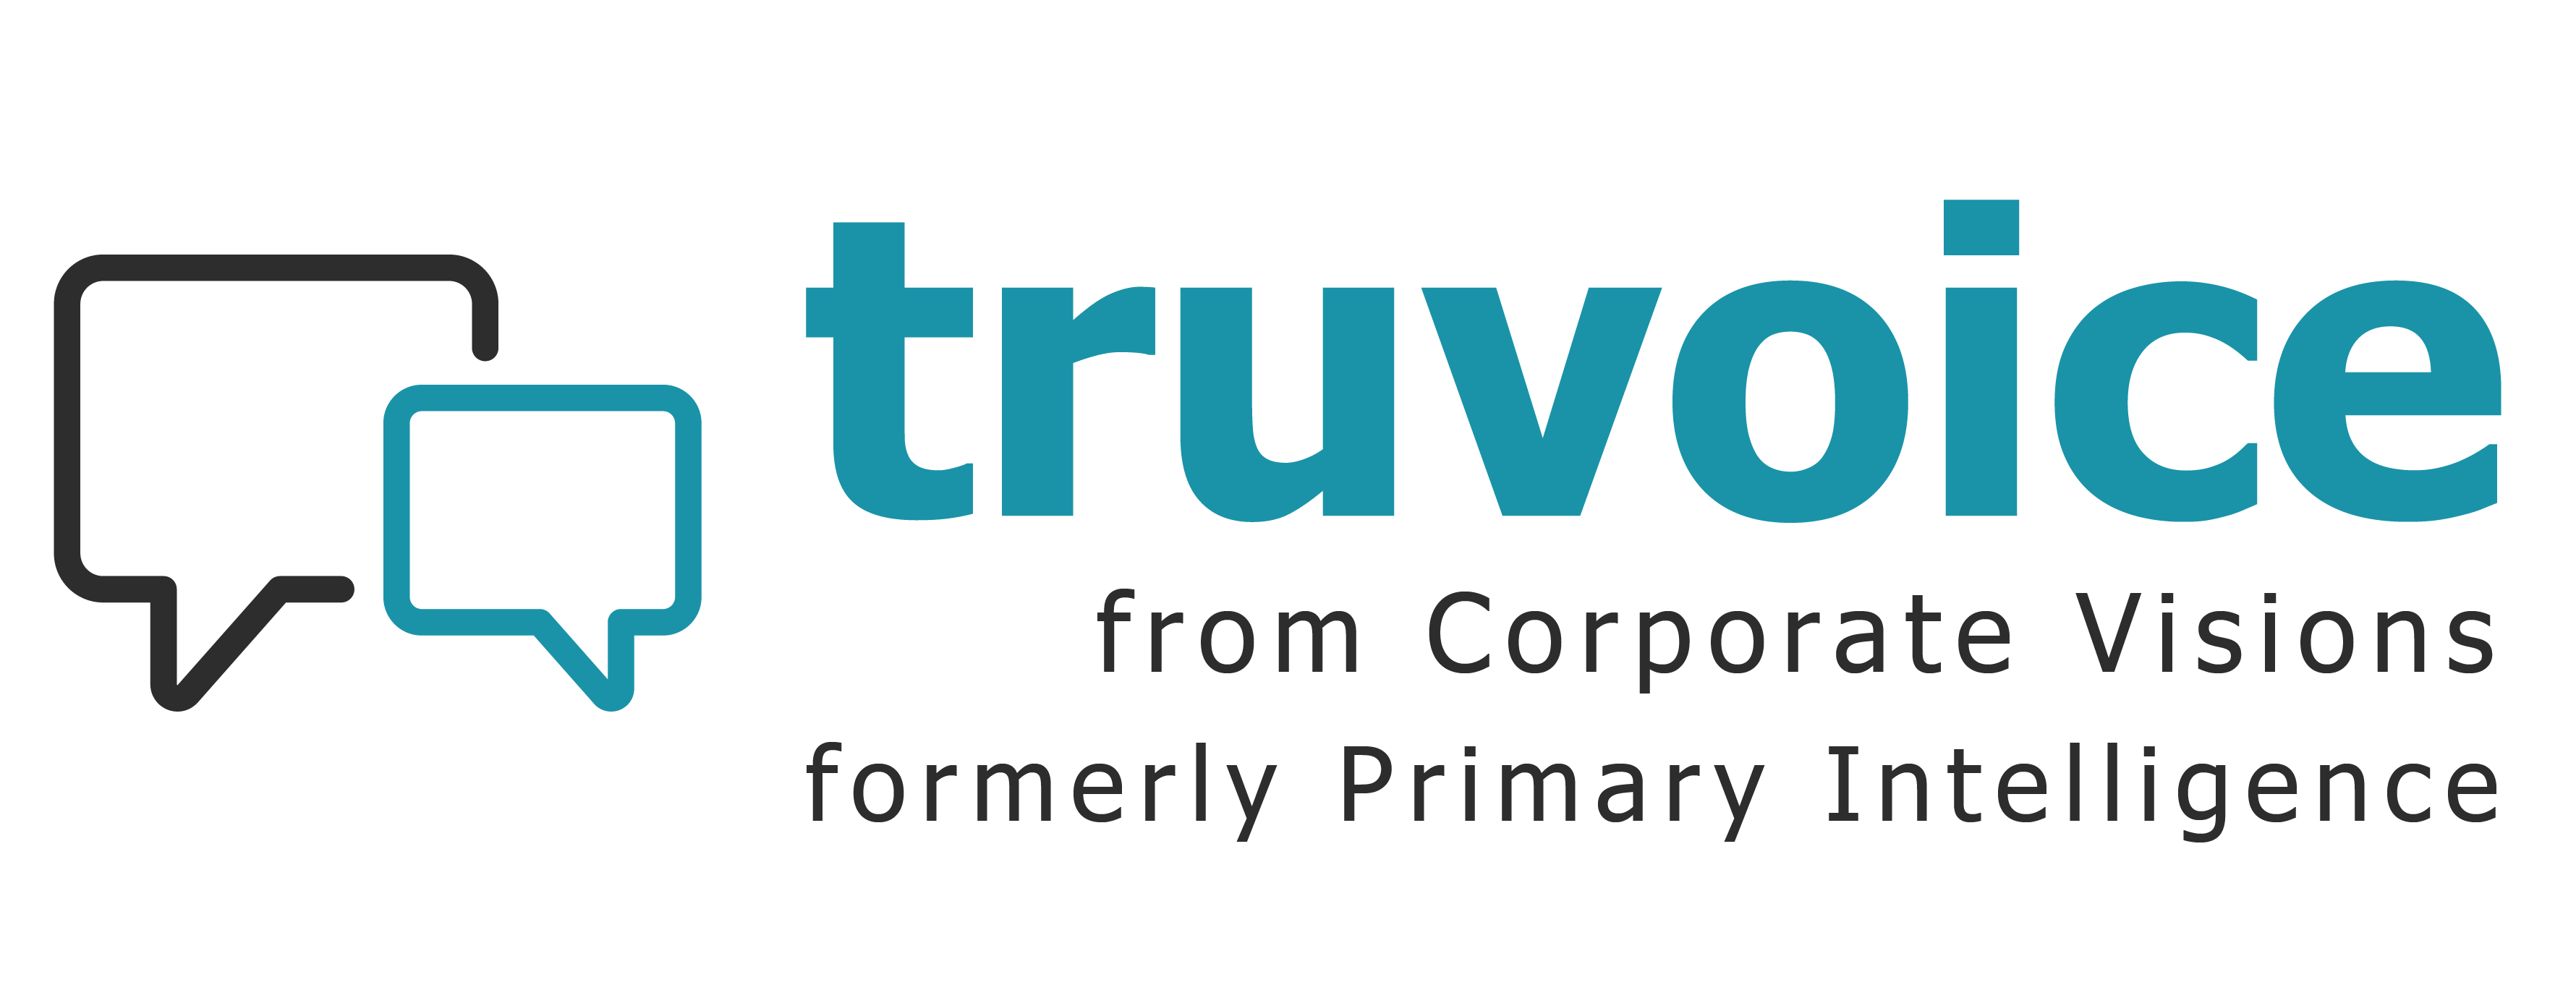 TruVoice from Corporate Visions Formerly Primary Intelligence